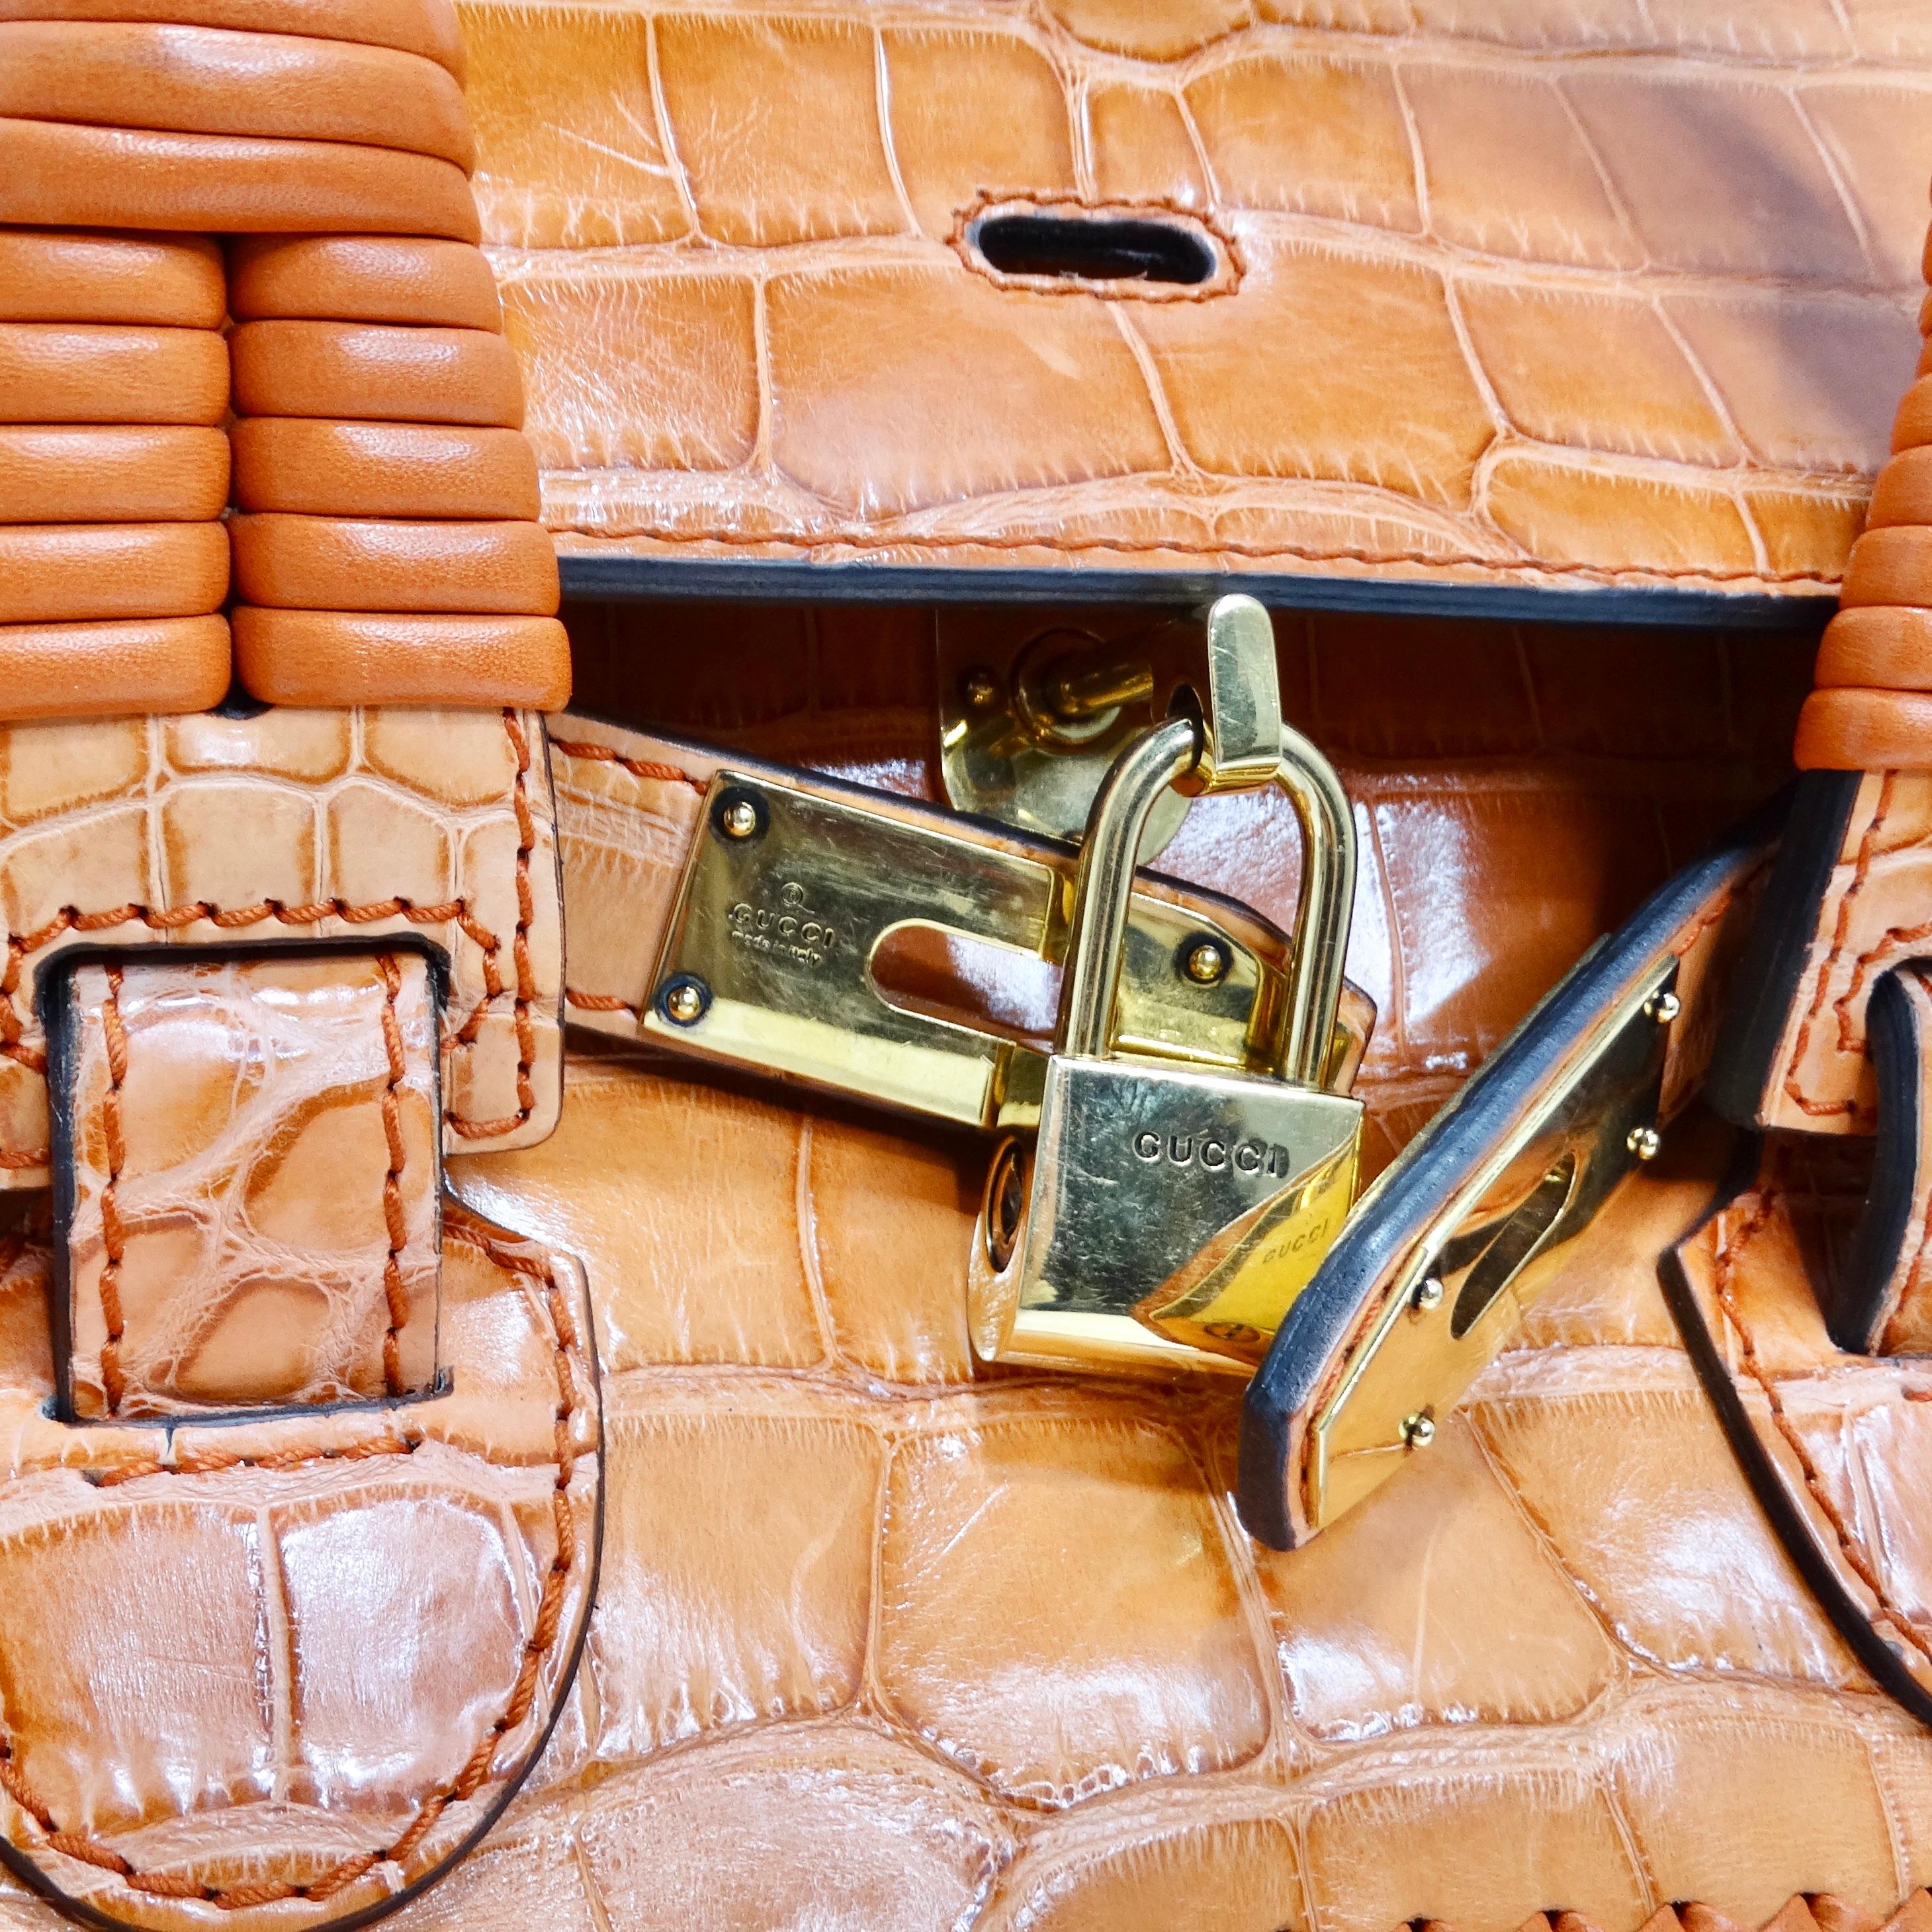 Introducing the Gucci Rare Orange Crocodile Leather Woven Top Handle Bag, a stunning and exclusive piece that exudes luxury and sophistication. Crafted from rich orange crocodile leather, this stylish tote features exquisite artisanal woven